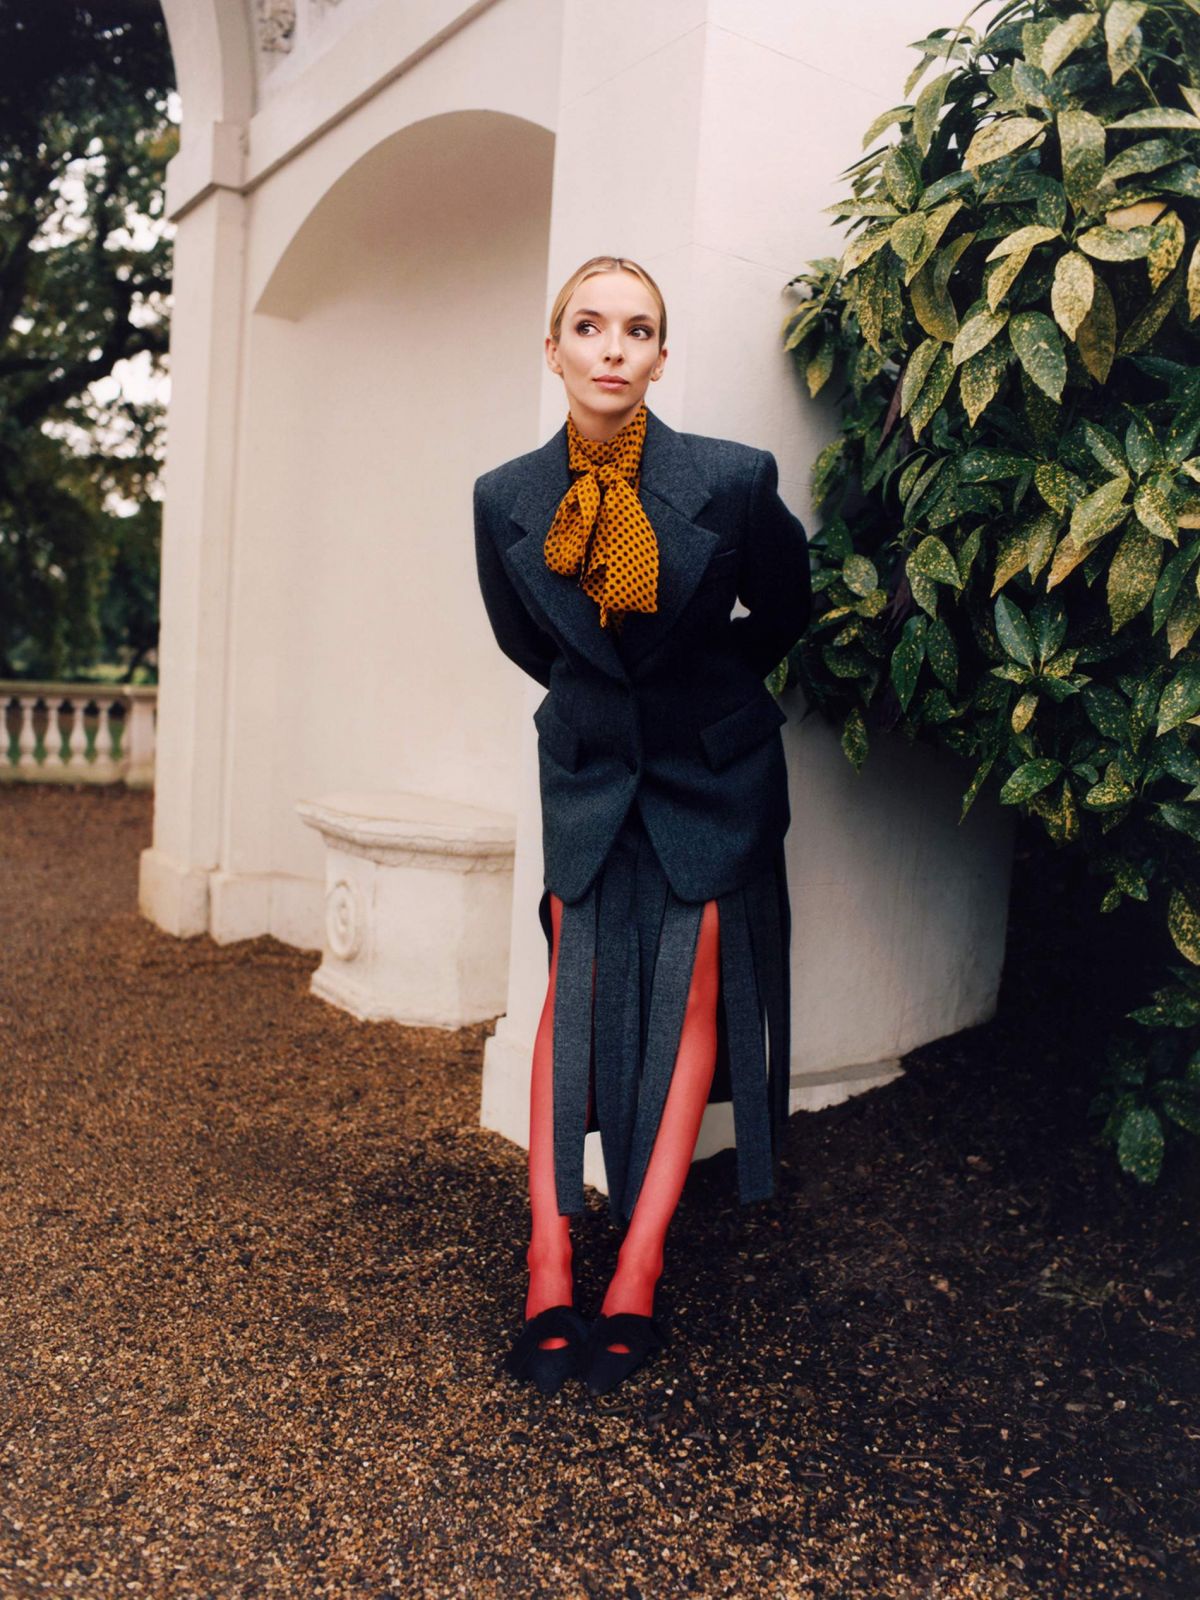 Jodie Comer Photoshoot for The Edit by Net-a-porter, November 2020